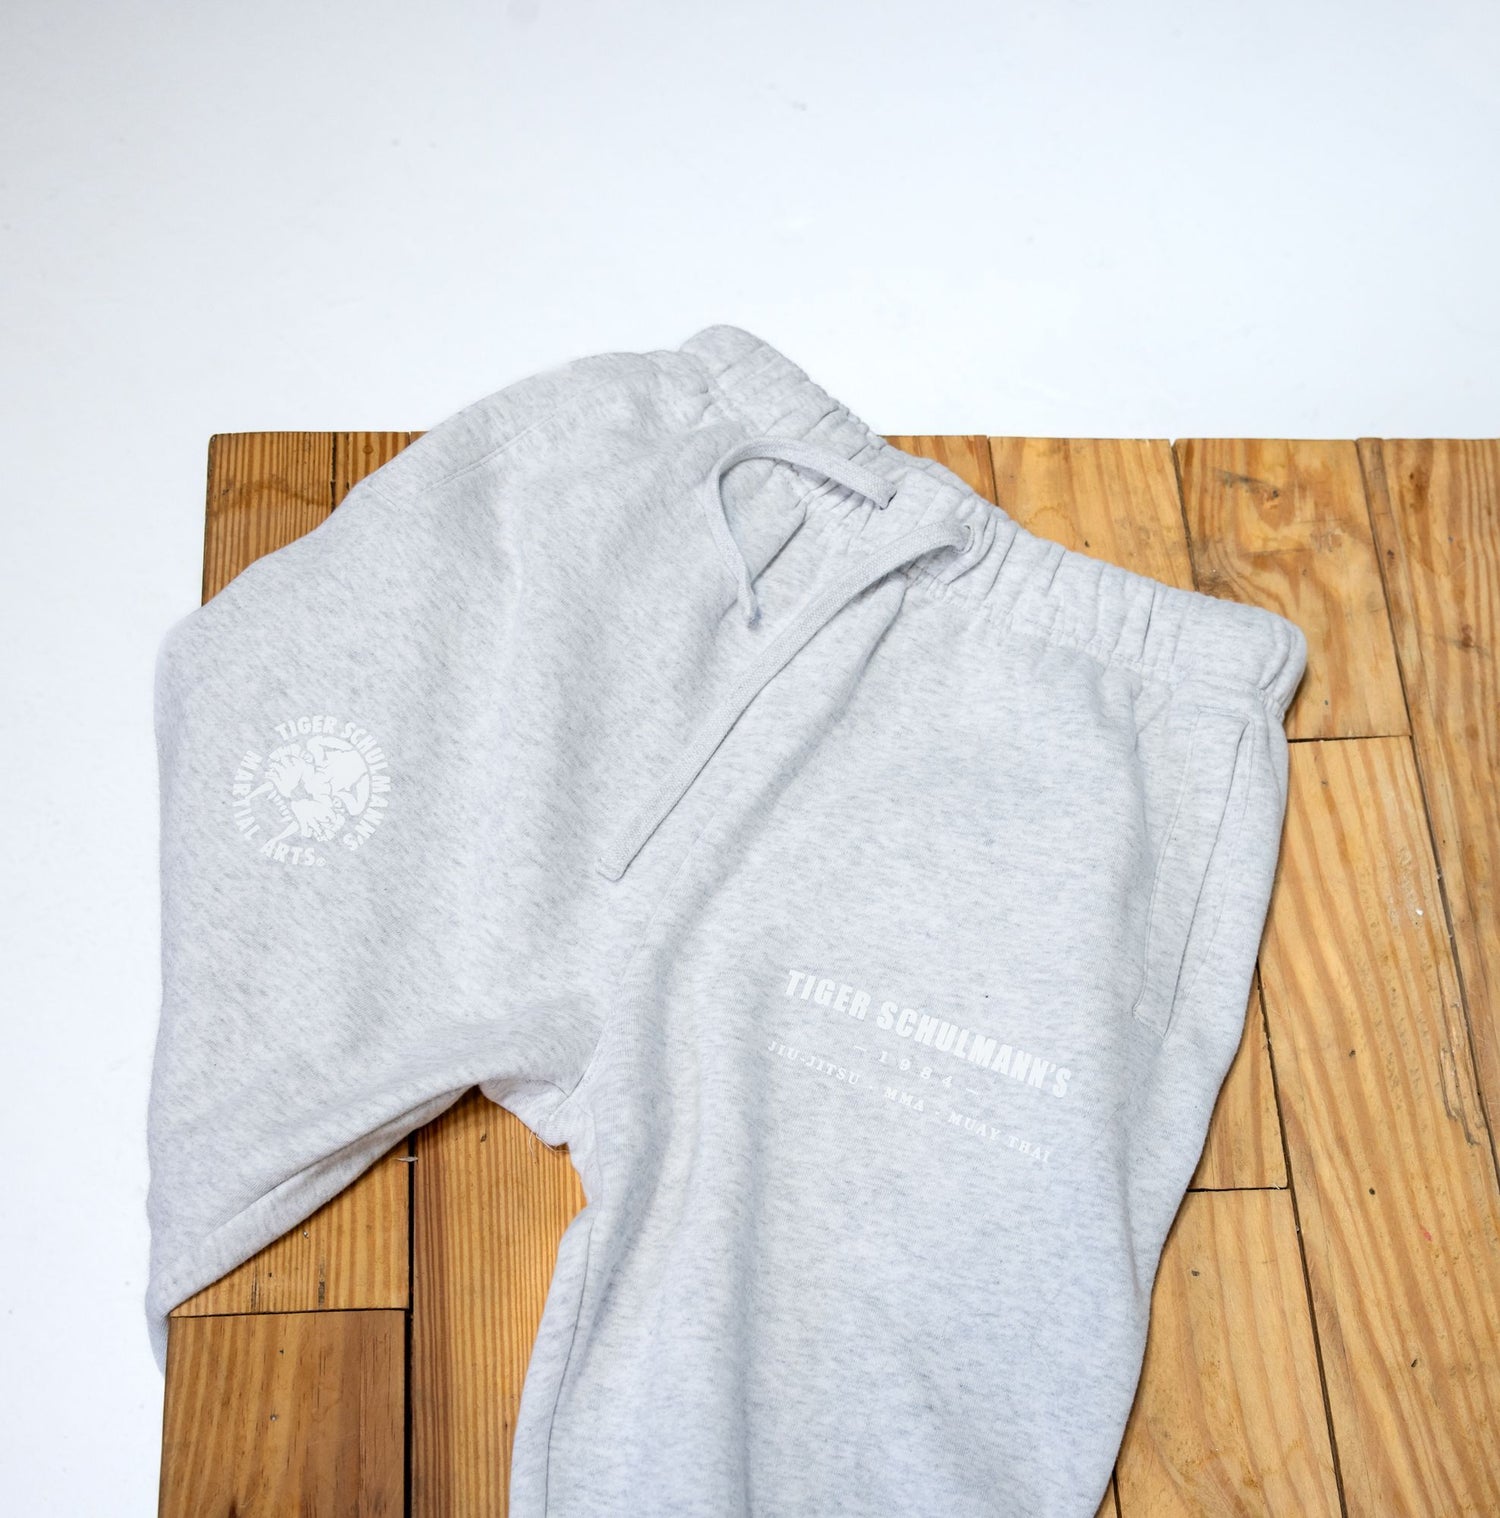 'At Ease’ Sweats - White Heather